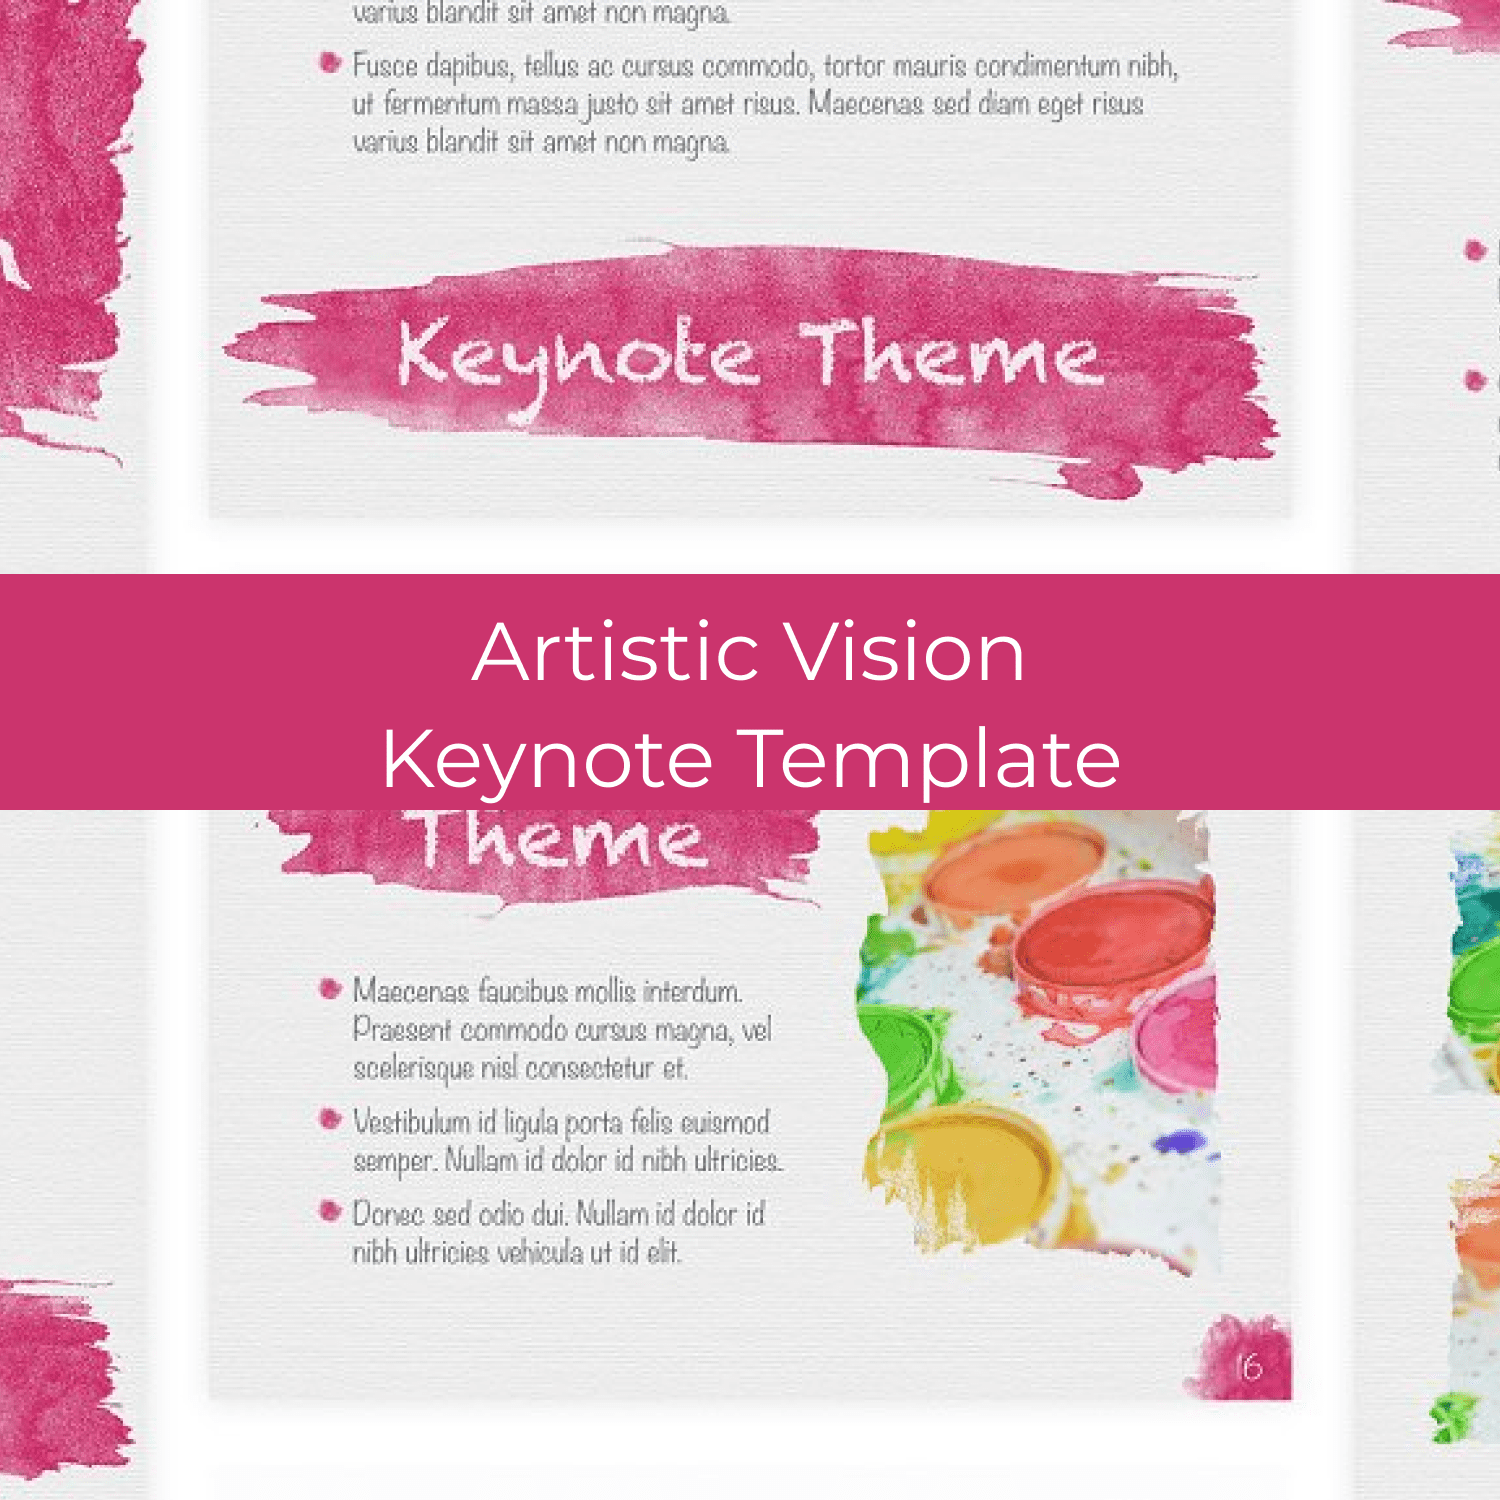 Artistic Vision Keynote Template cover.